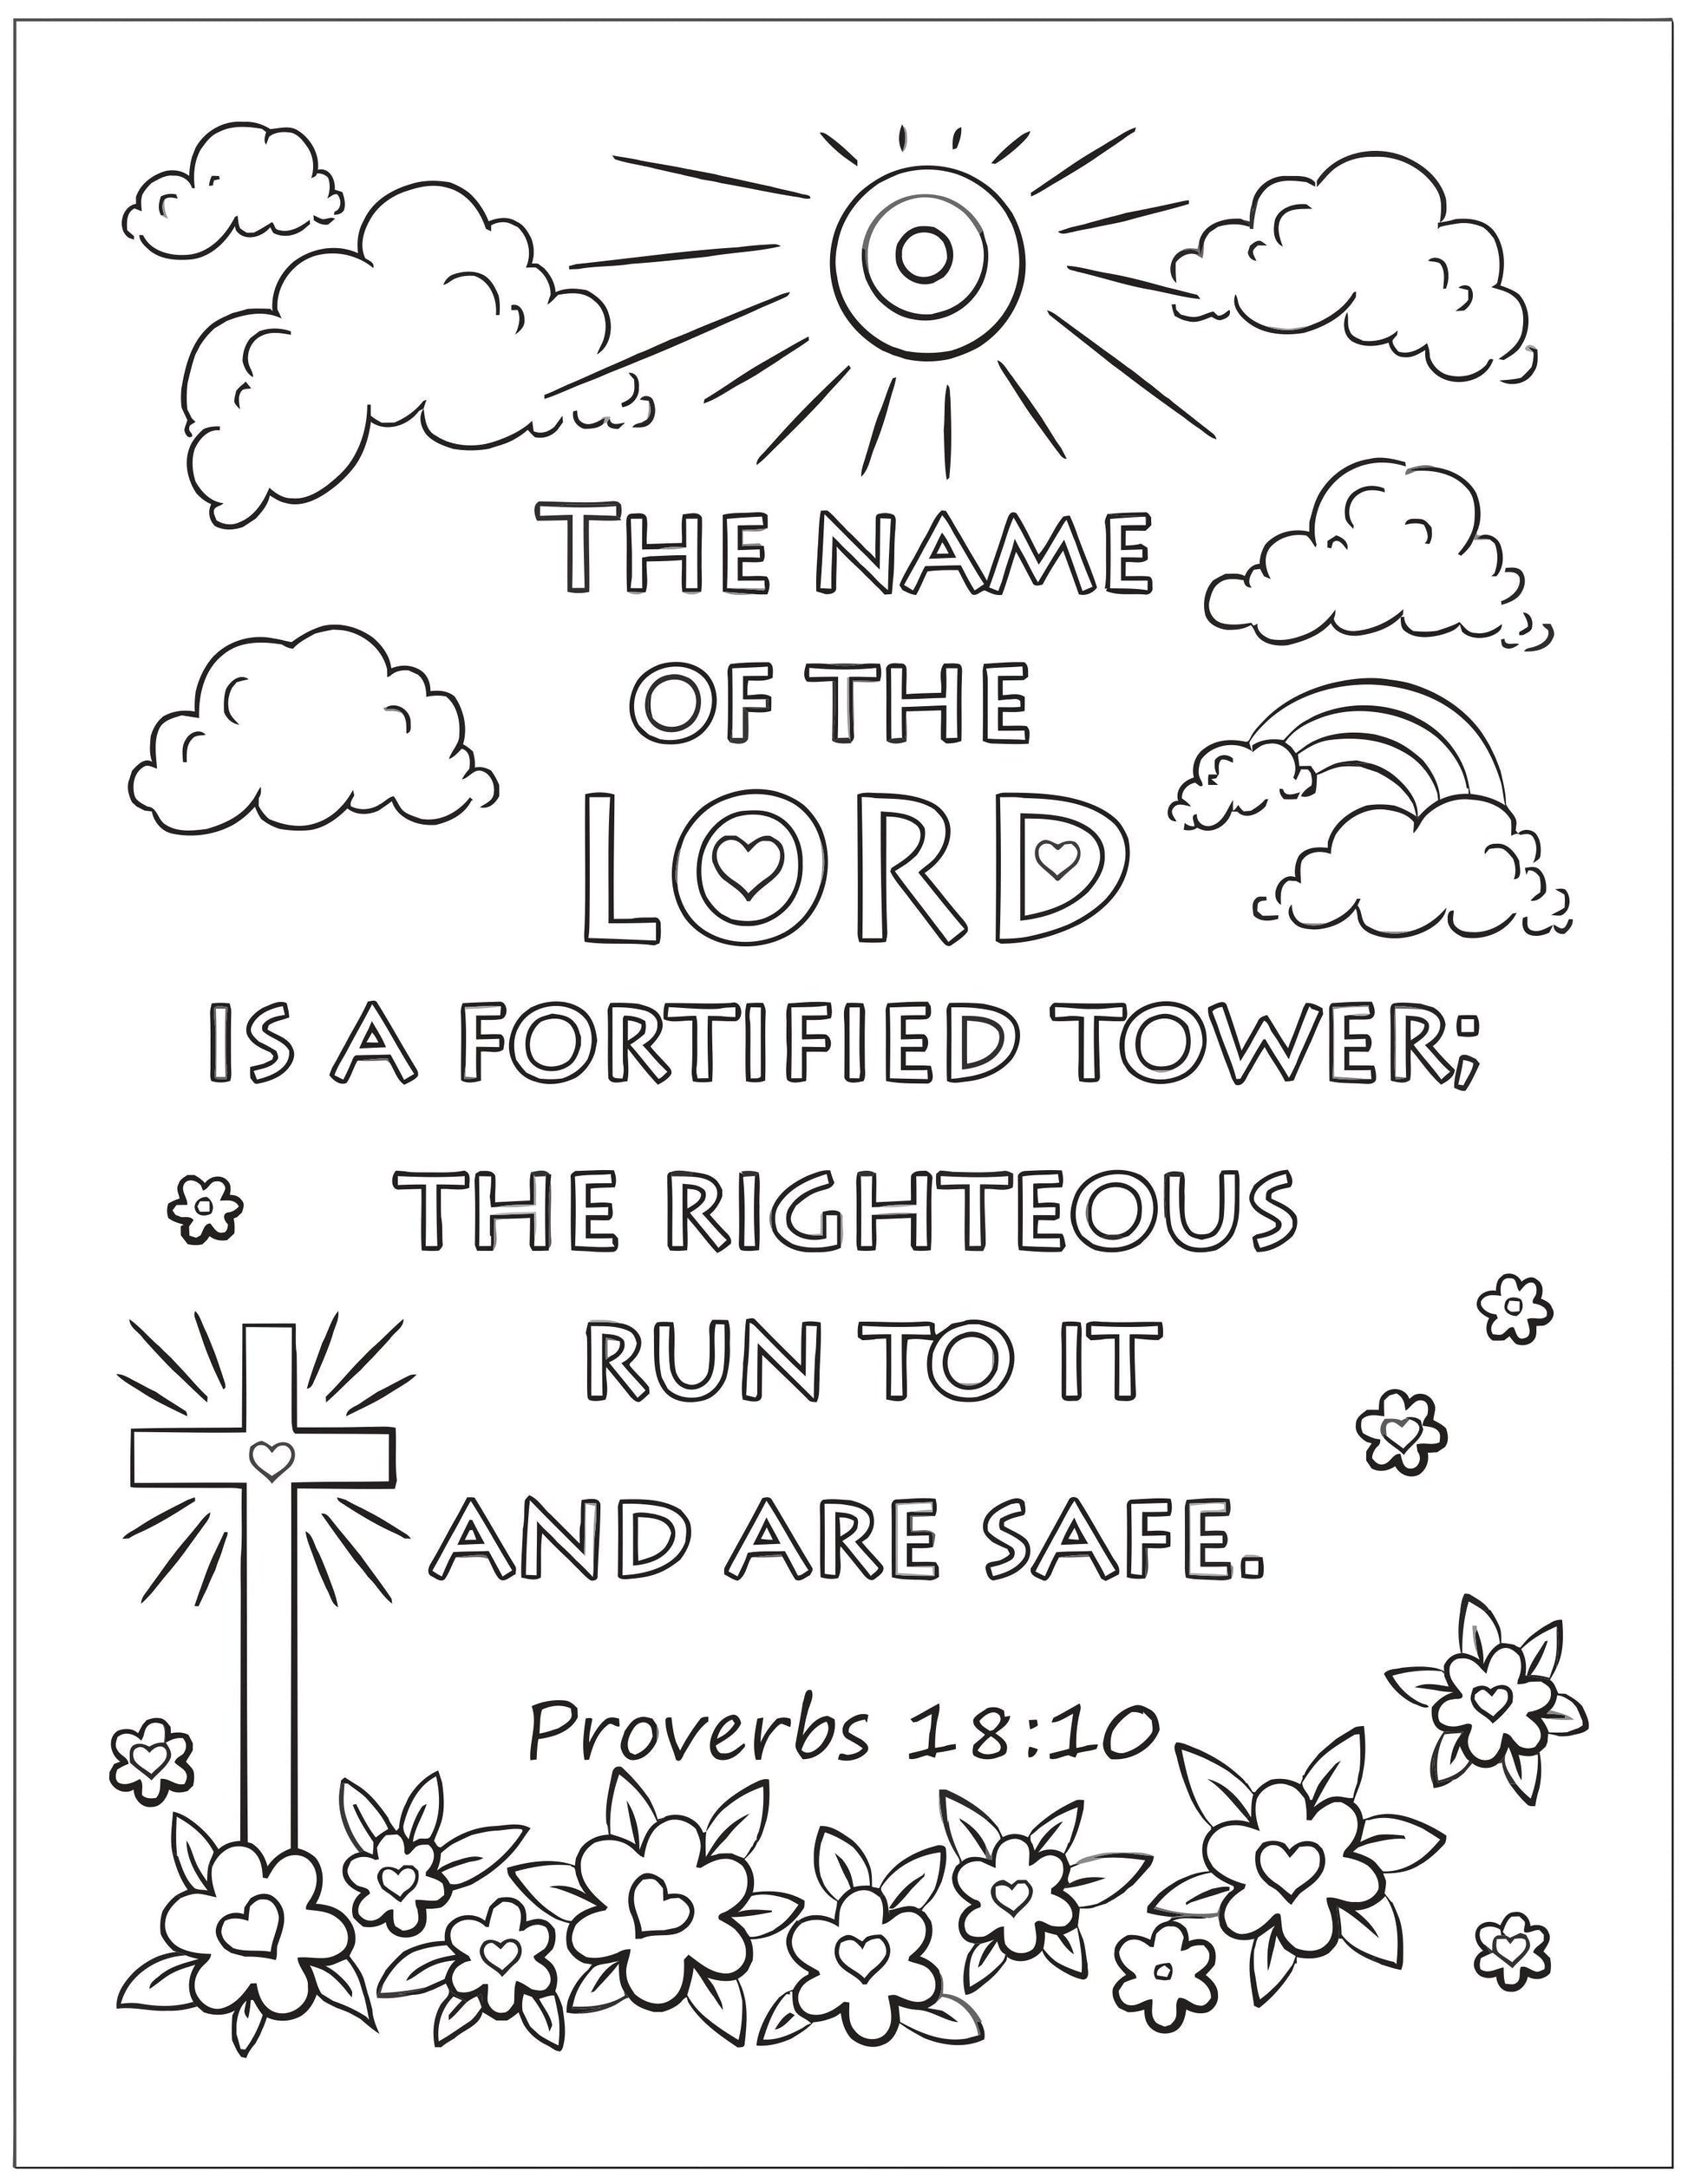 Bible memory verse coloring book pages download only